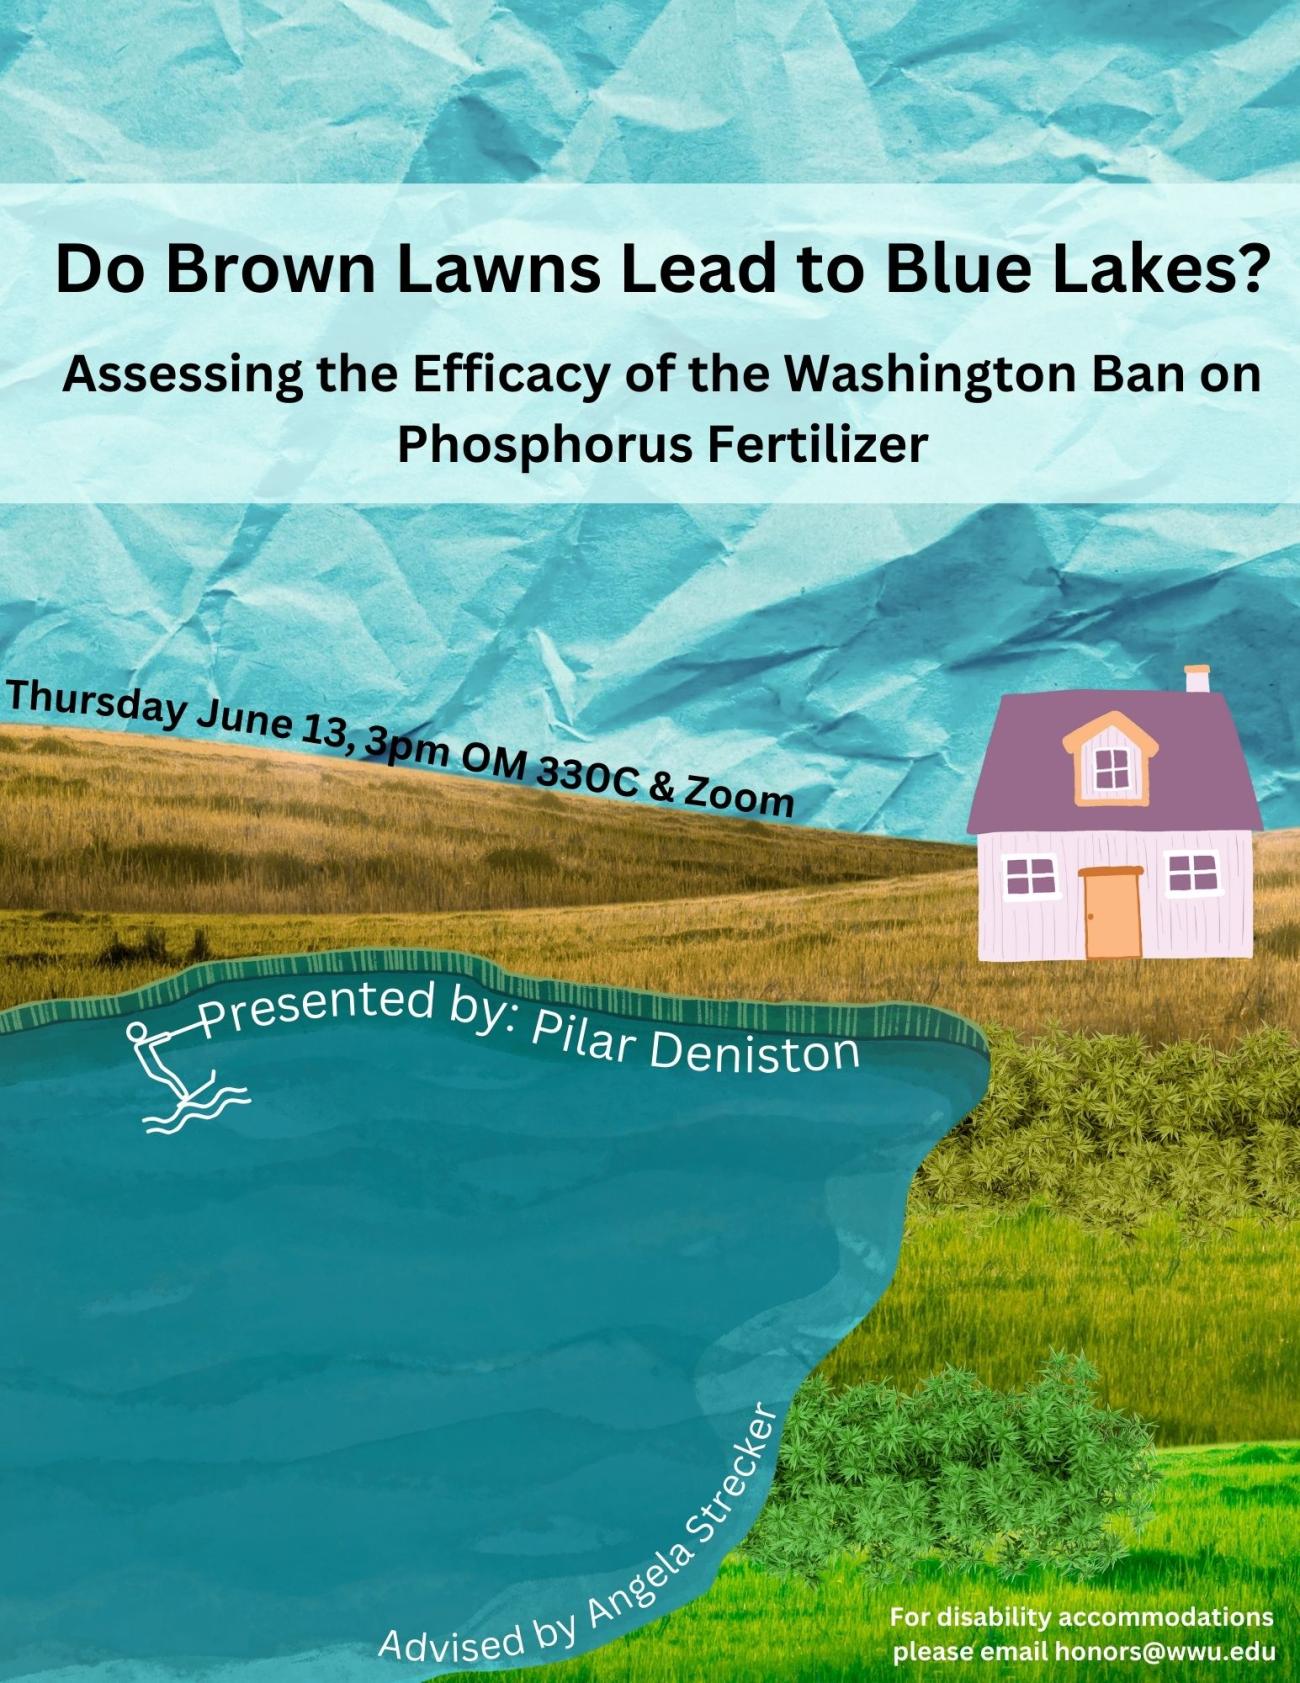 A poster with a blue lake and grass that fades from brown to green. The sky is a crumpled blue and a small purple house sits on the hill. The text reads "Do Brown Lawns Lead to Blue Lakes? Assessing the Efficacy of the Washington Ban on Phosphorus Fertilizer. Presented by: Pilar Deniston. Advised by Angela Strecker. Thursday, June 13th, 2022. 3:00 PM. OM 330C & Zoom. For disability accommodations, please email honors@wwu.edu"